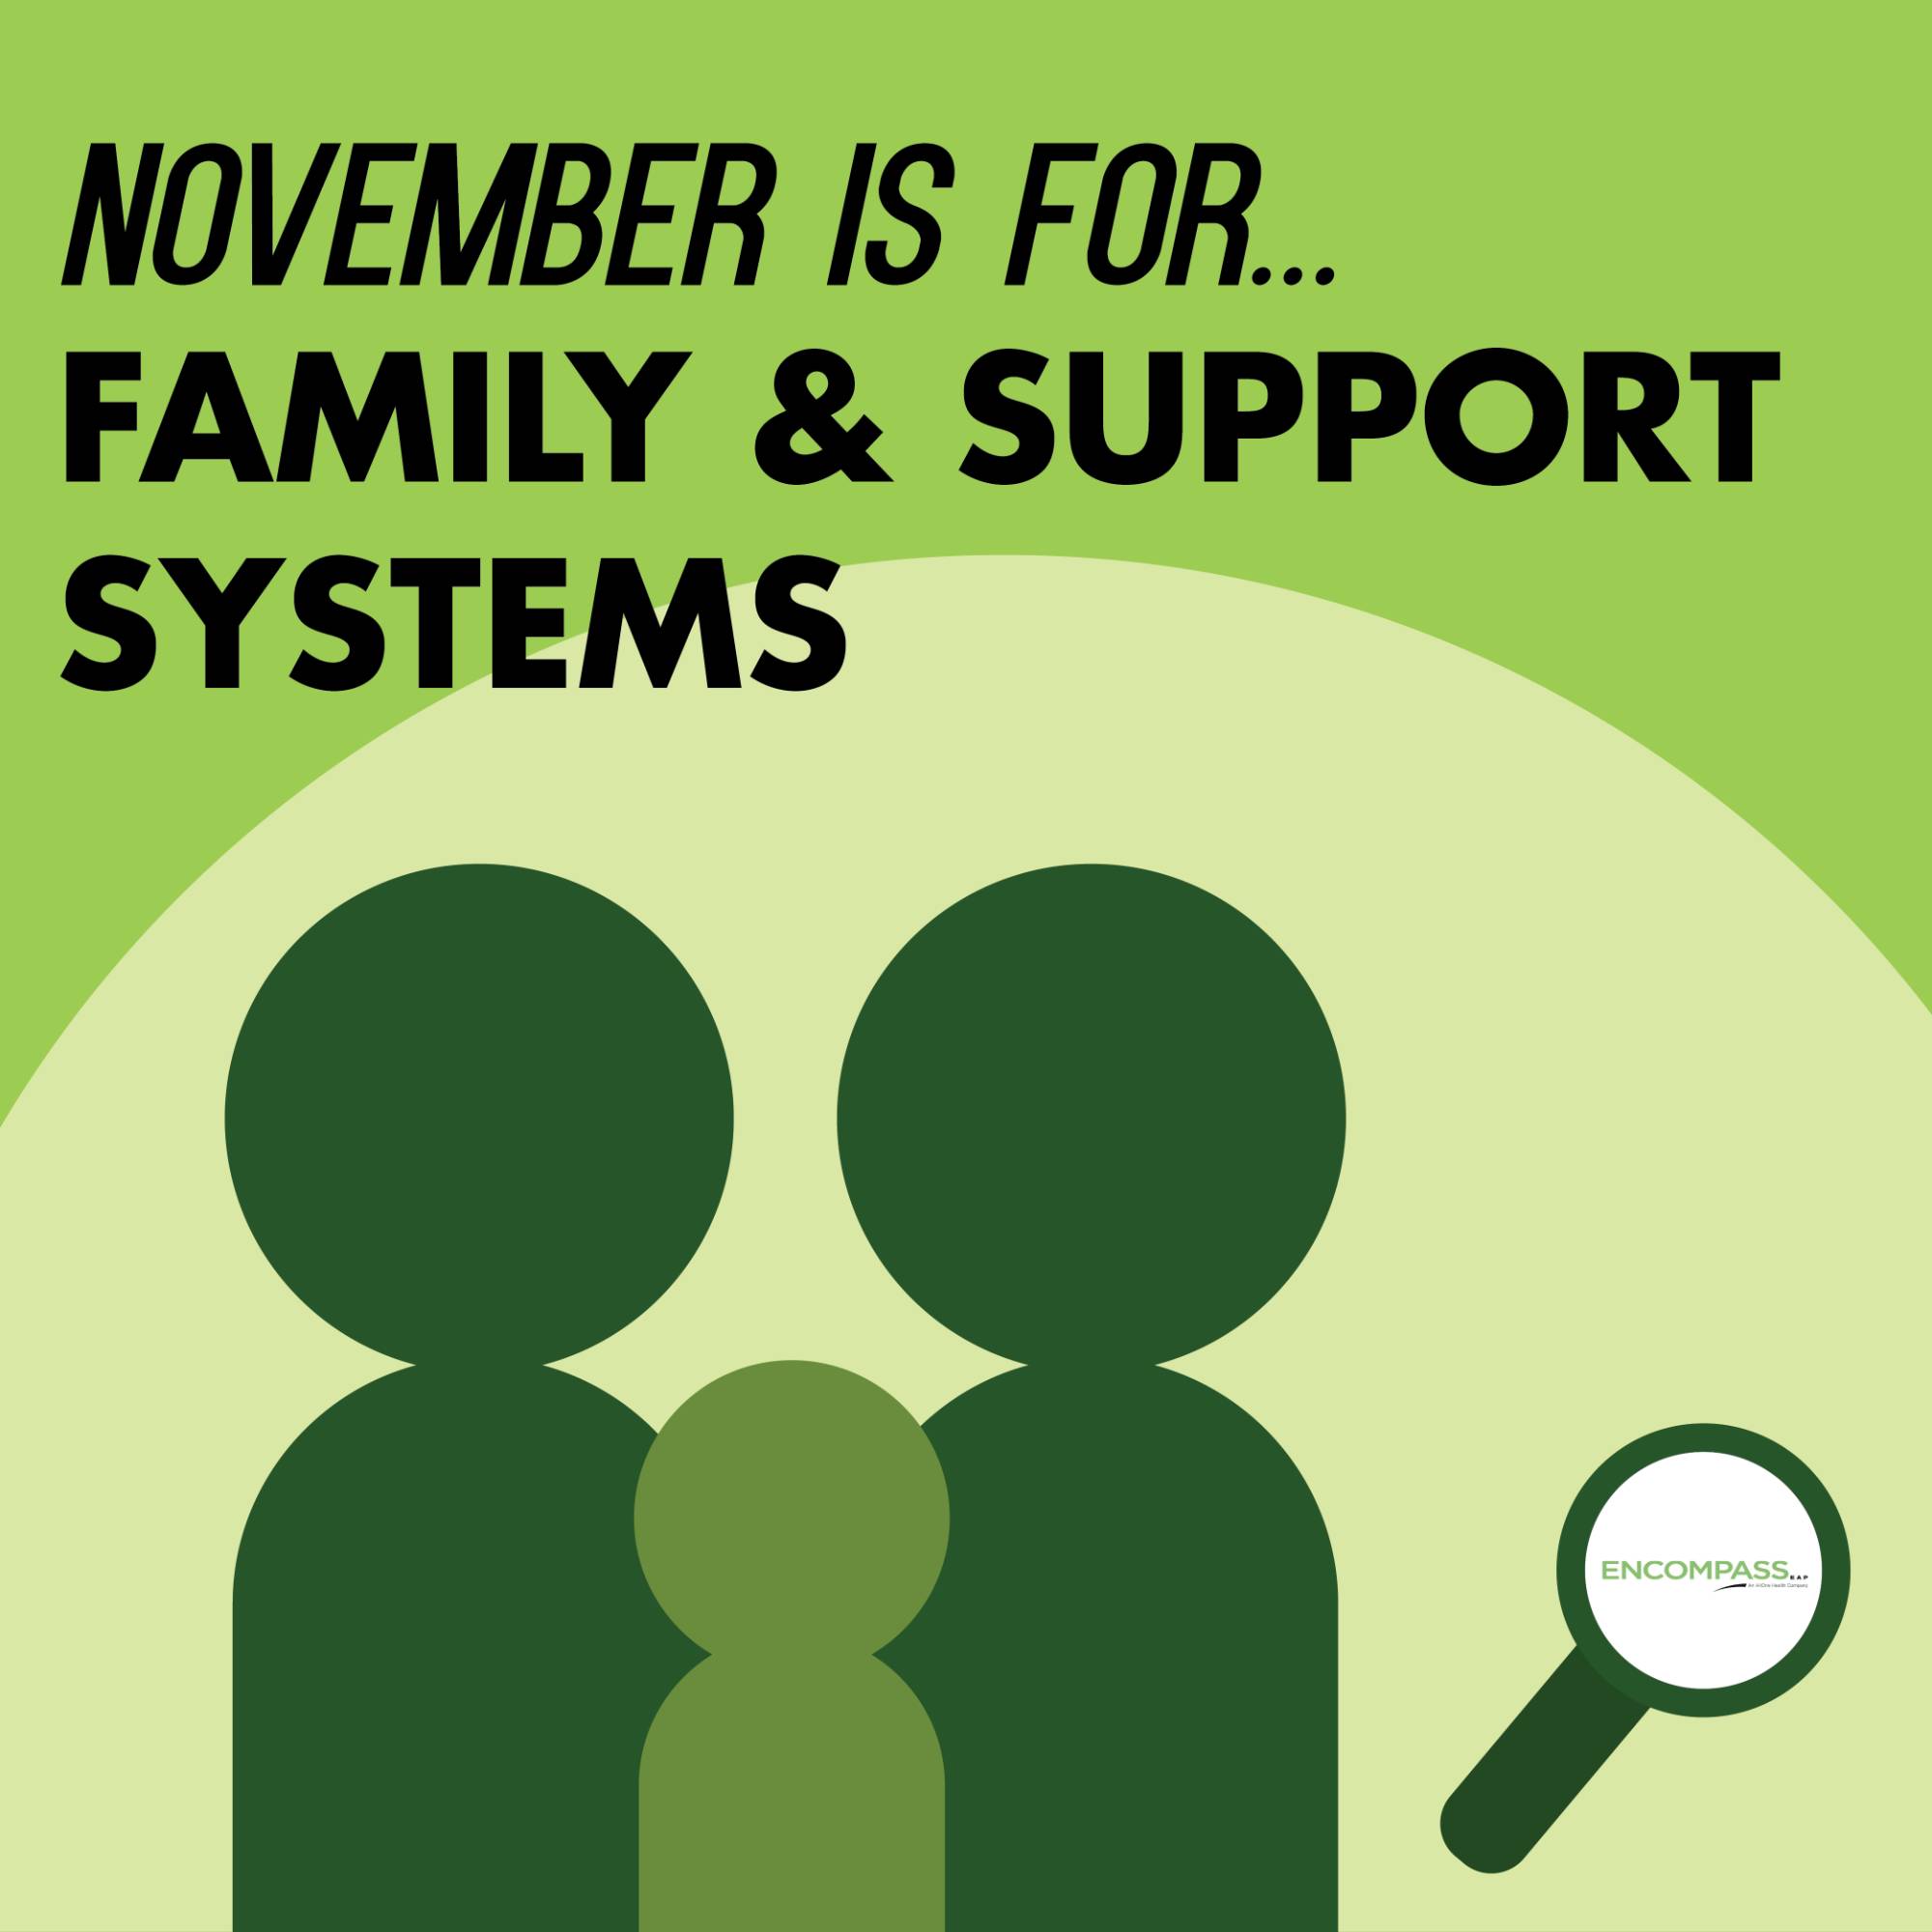 November is for Family and Support Systems